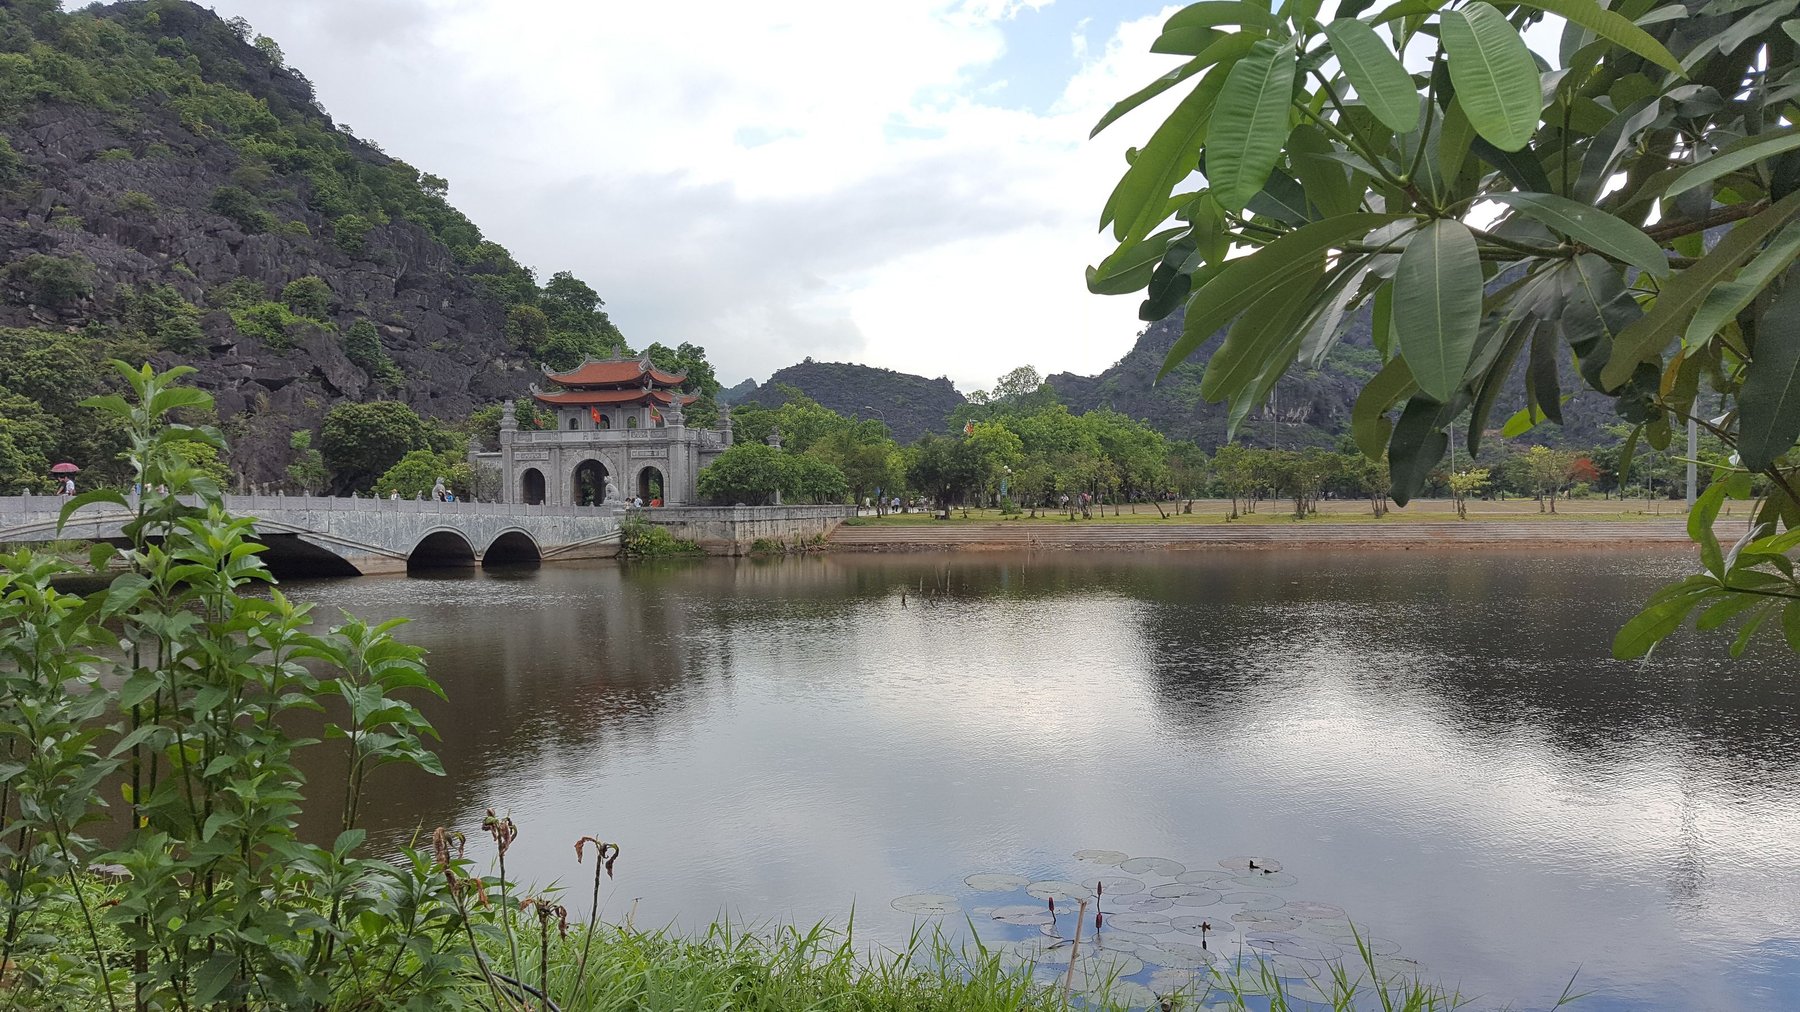 A bridge leading to an ornate gate viewed from across a still river.